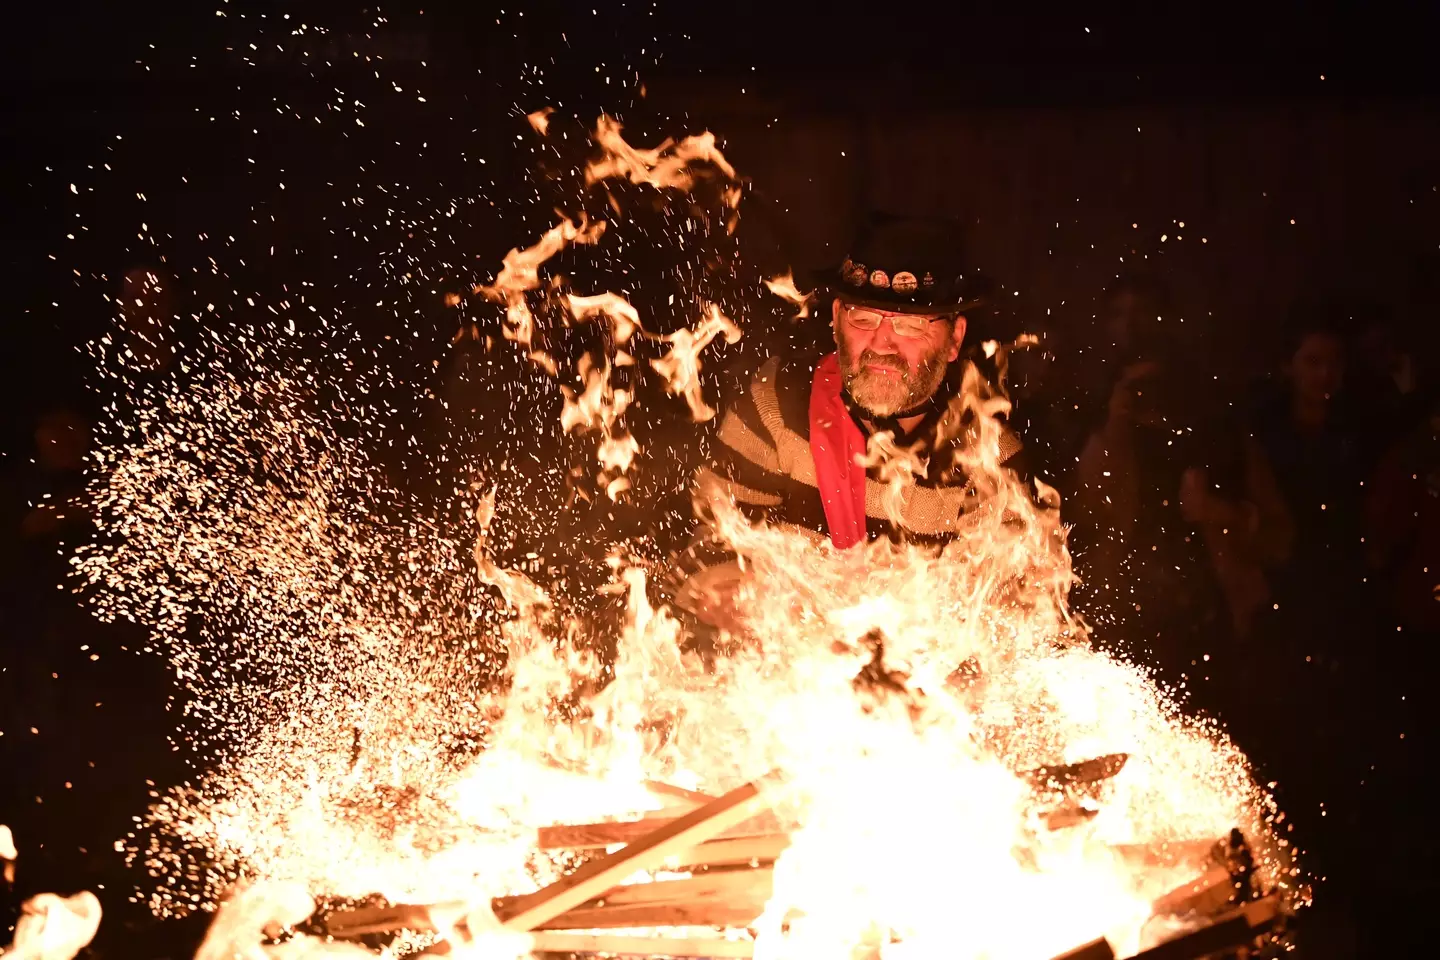 Lewes Bonfire's torchlit traditions draw in crowds from across the UK.